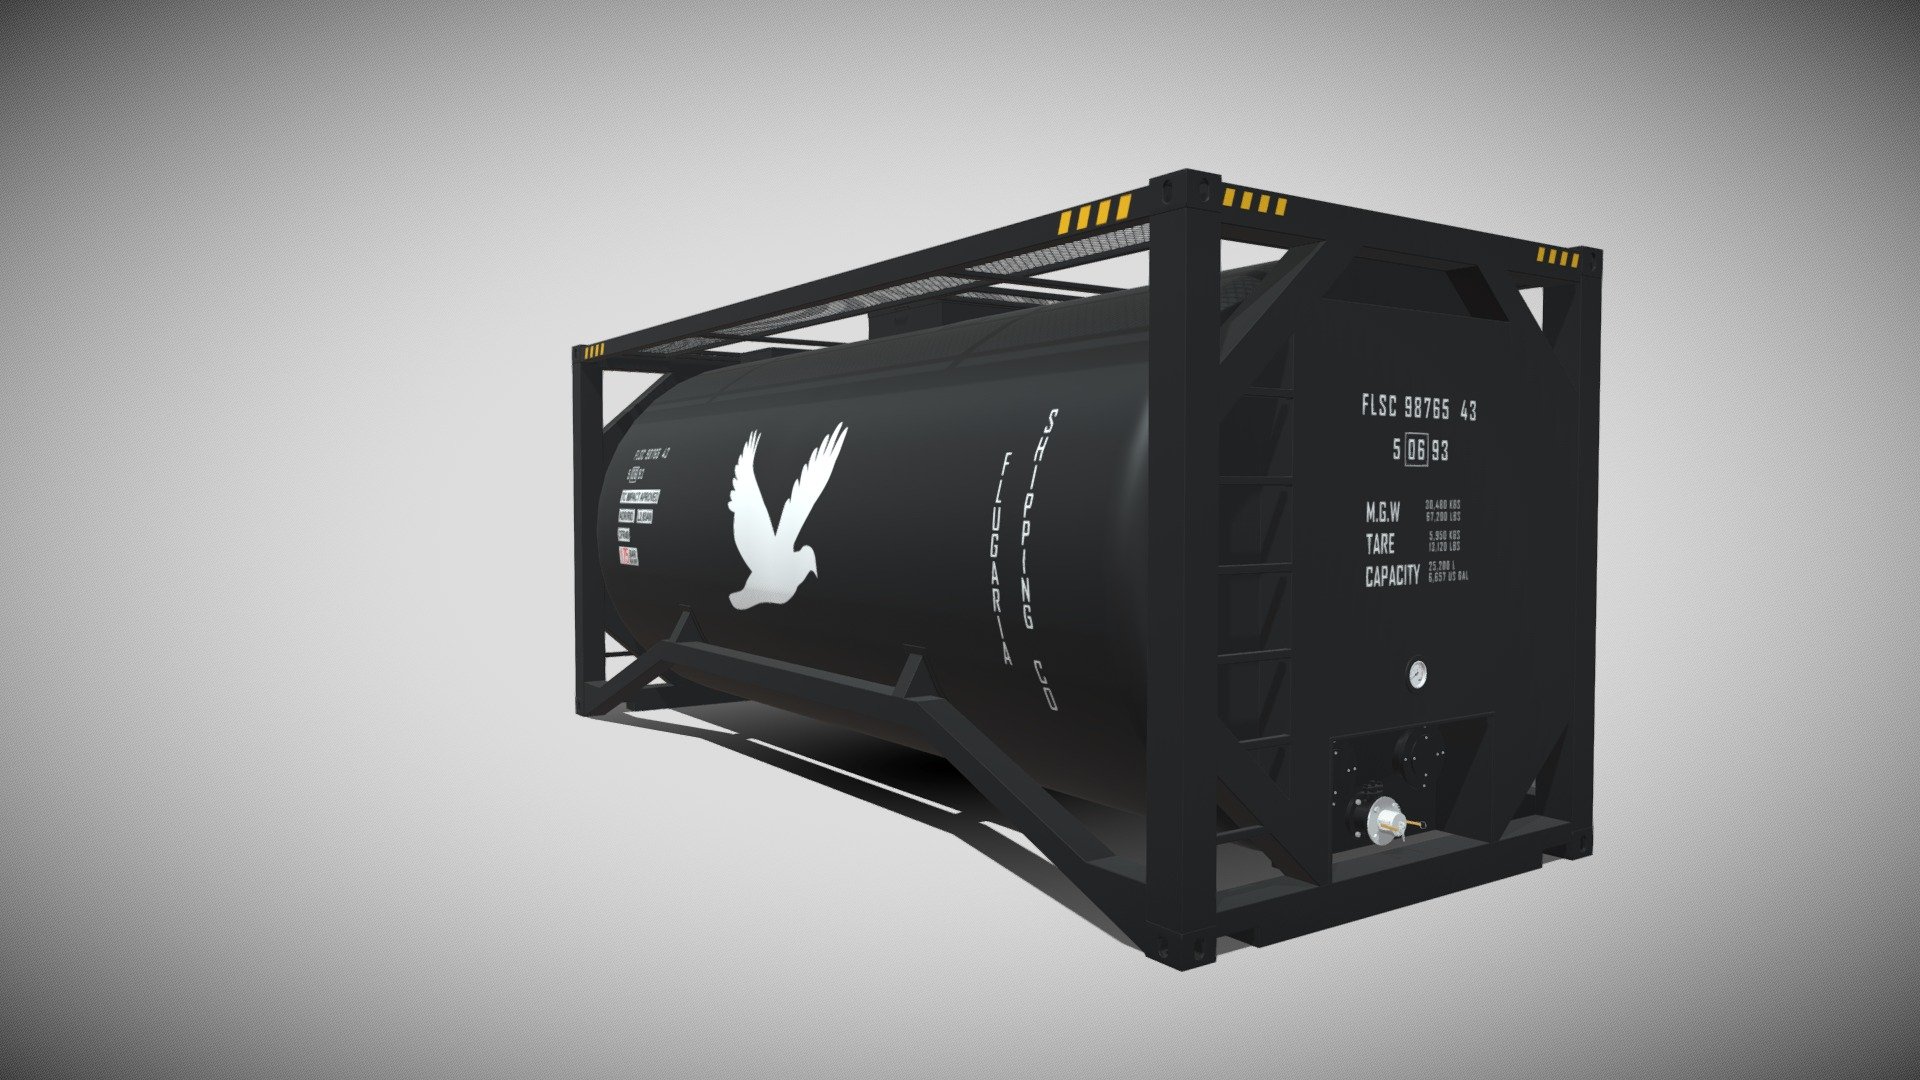 Detailed model of a 20ft Bitumen Tank Container, modeled in Cinema 4D.The model was created using approximate real world dimensions.

The model has 51,955 polys and 52,892 vertices.

An additional file has been provided containing the original Cinema 4D project files with both standard and v-ray materials, textures and other 3d export files such as 3ds, fbx and obj 3d model